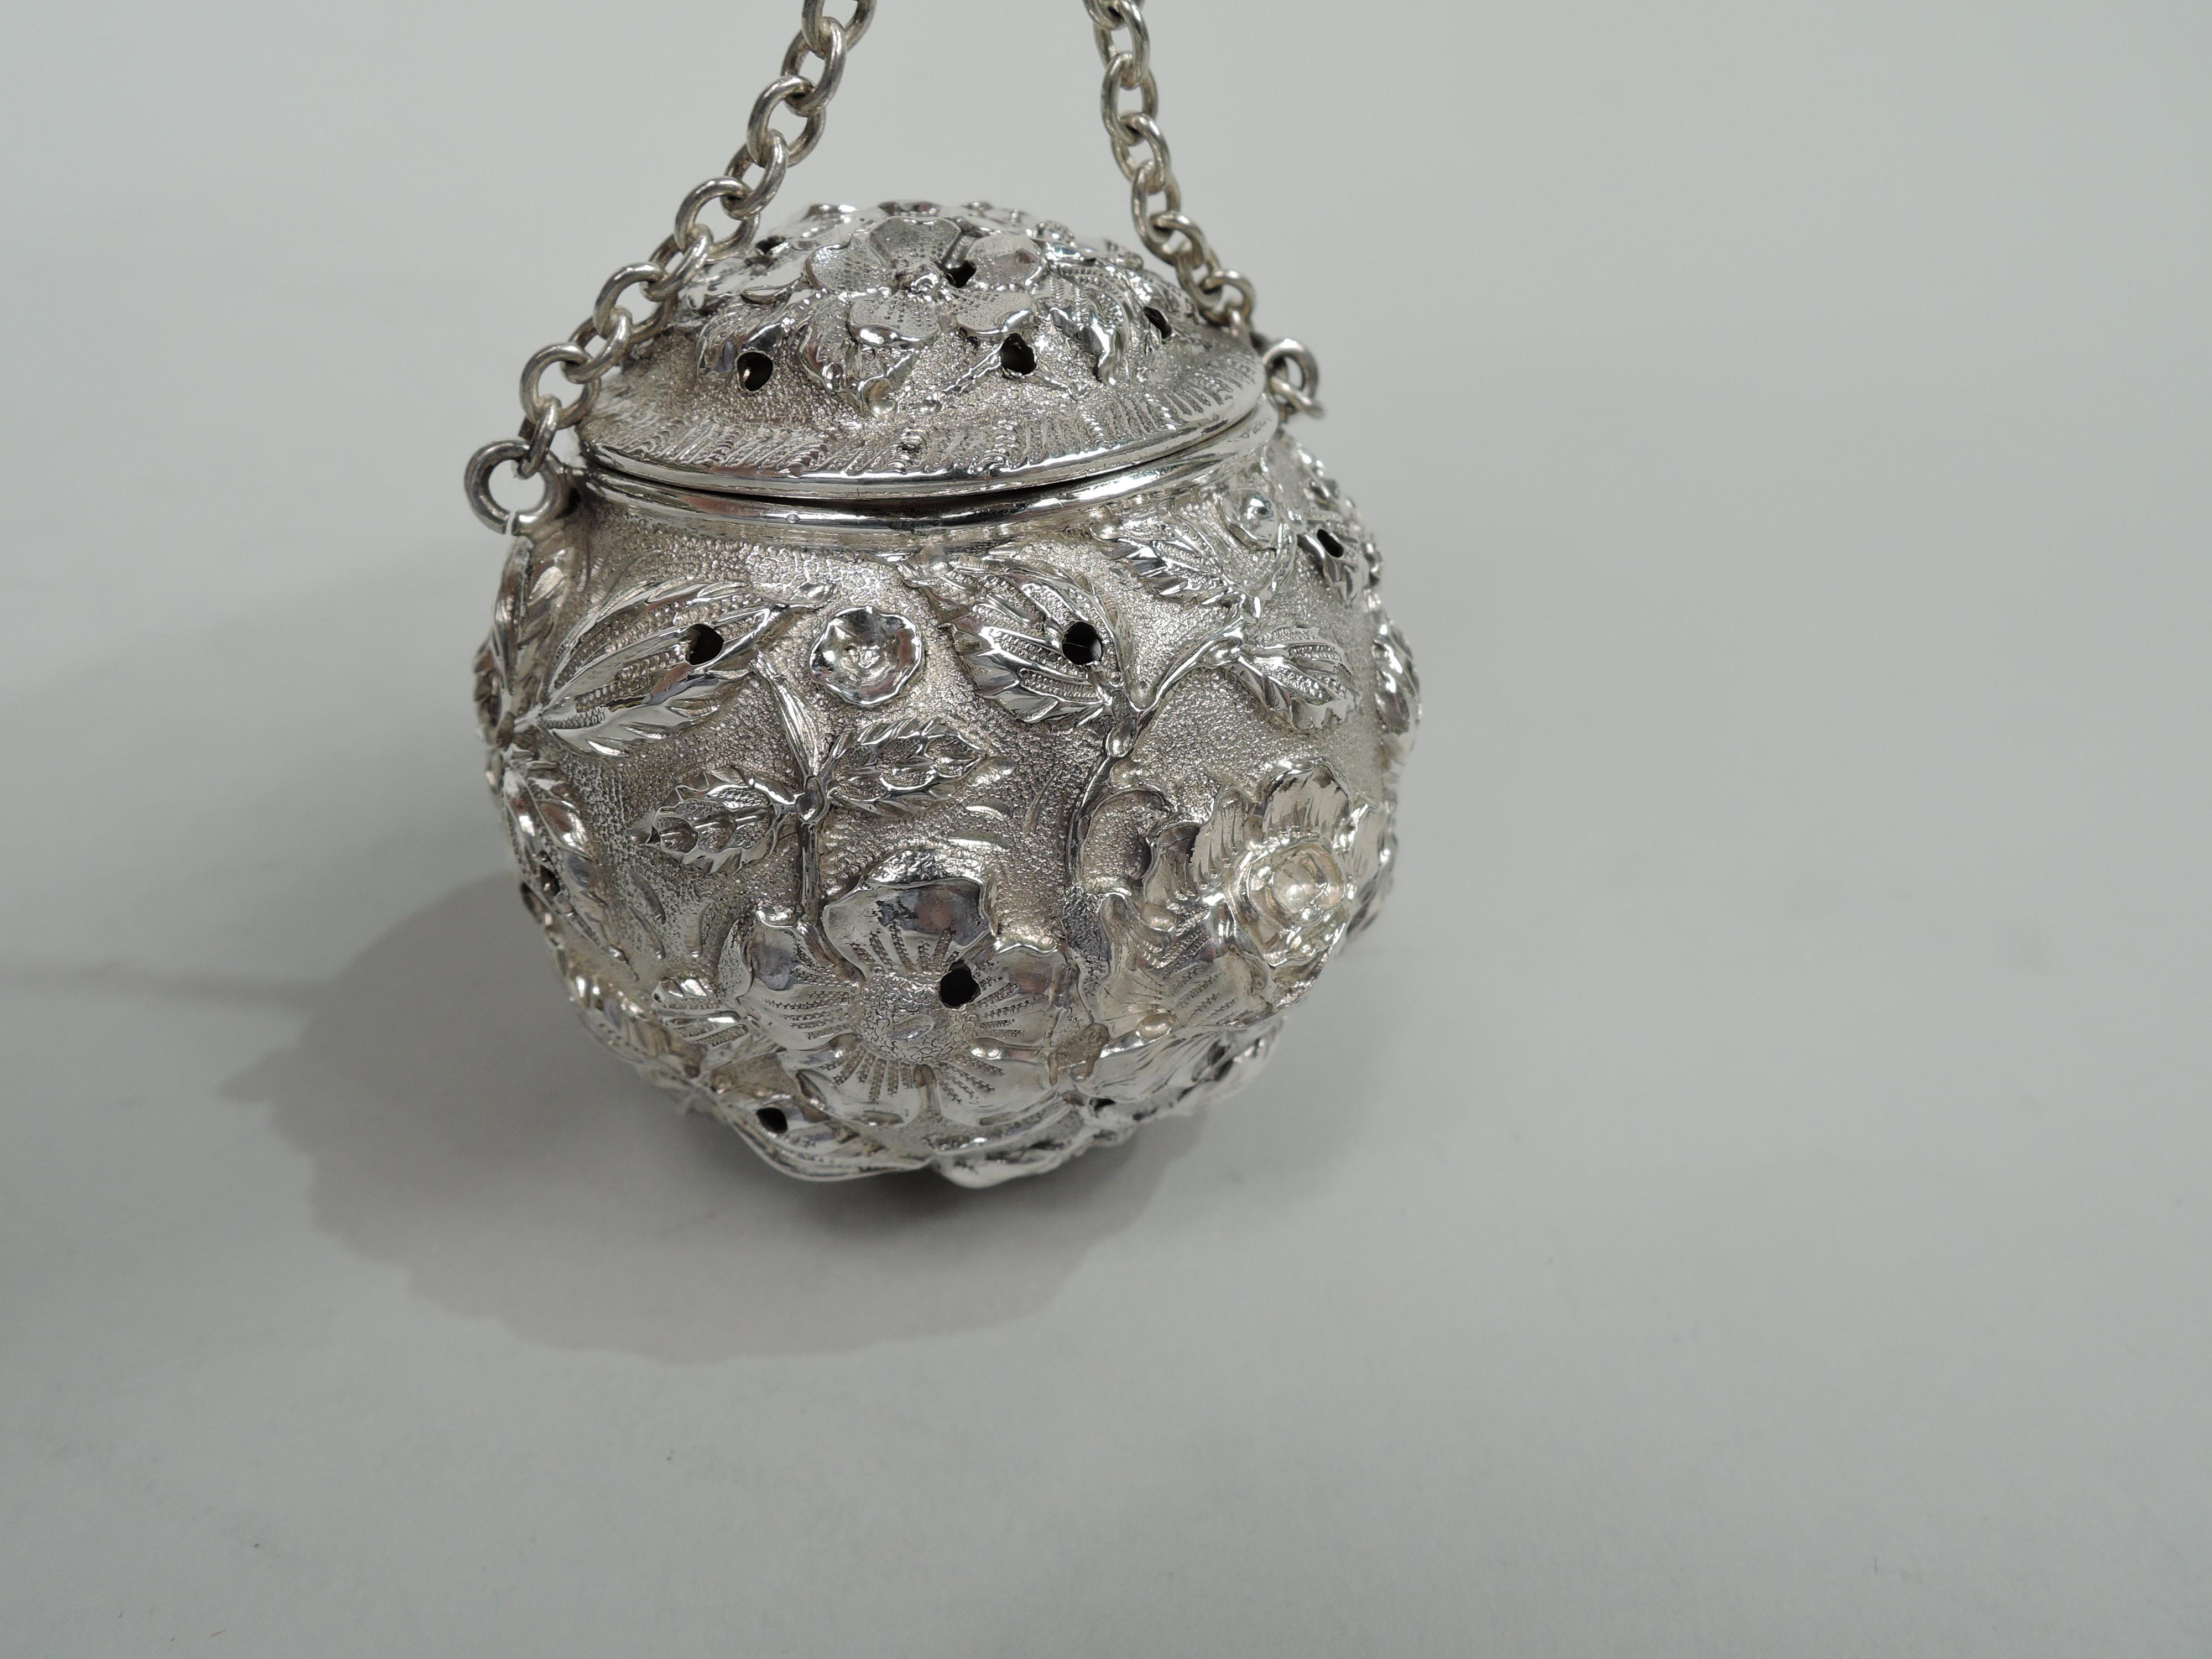 Finest quality sterling silver tea ball. Made by Stieff in Baltimore, circa 1920. Floral repousse on stippled ground. Allover piercing for even diffusion and snuggly-fitted hinged cover guaranteed not to spill open in the pot. Chain with ring finial